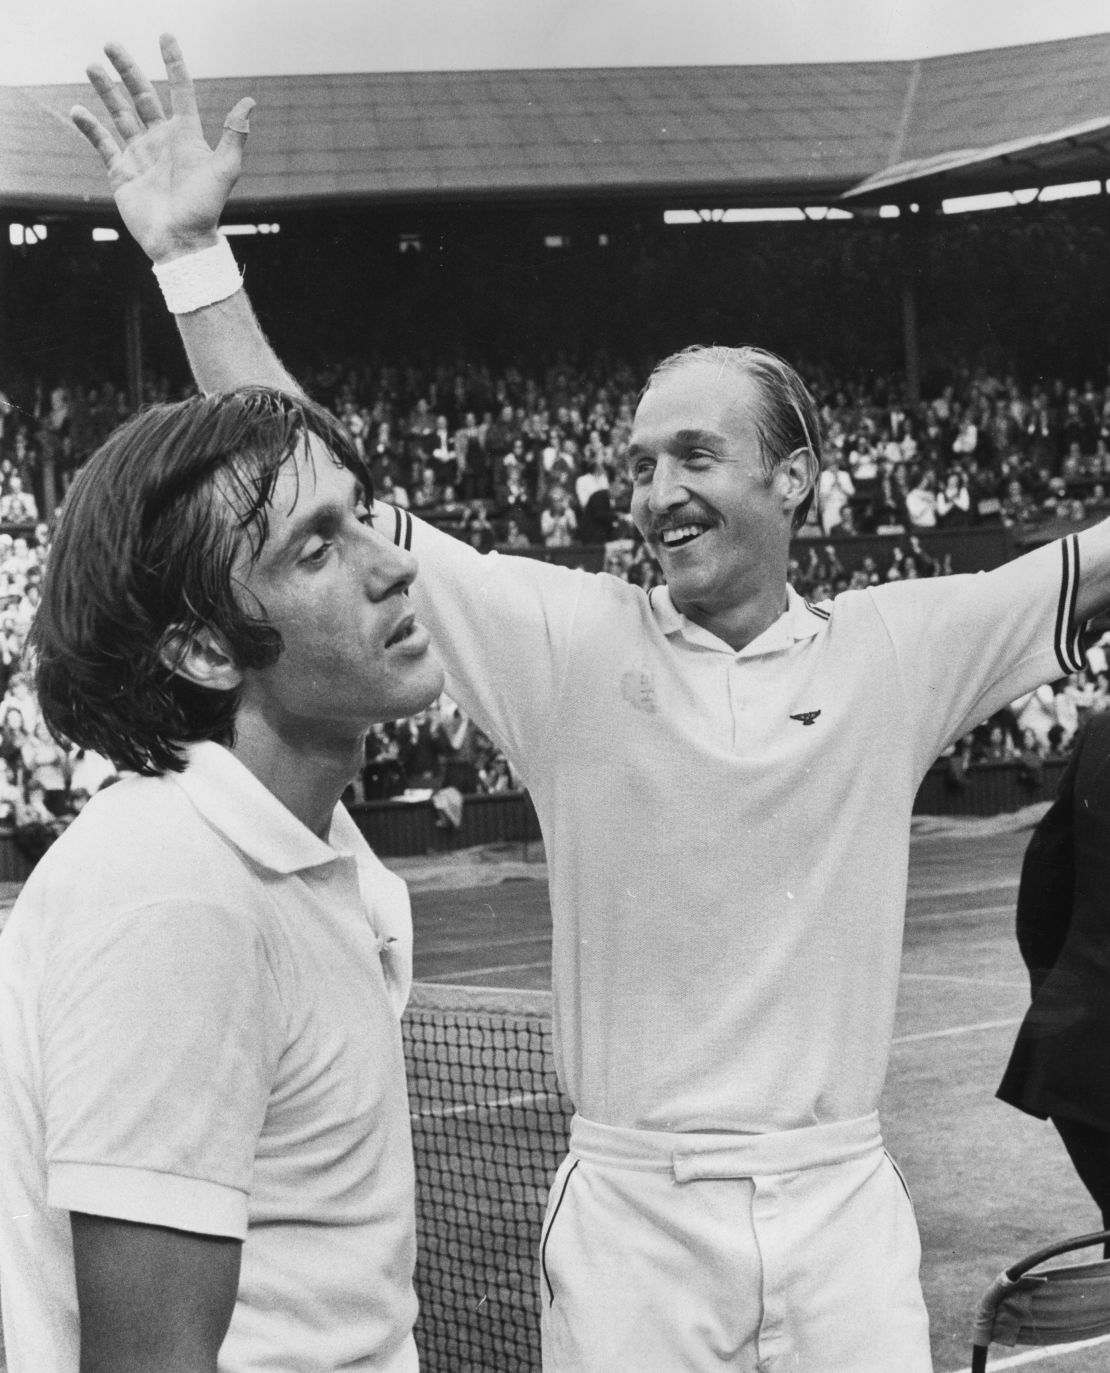 American Stan Smith, right, with  Nastase, his beaten opponent in the 1972 Wimbledon final.